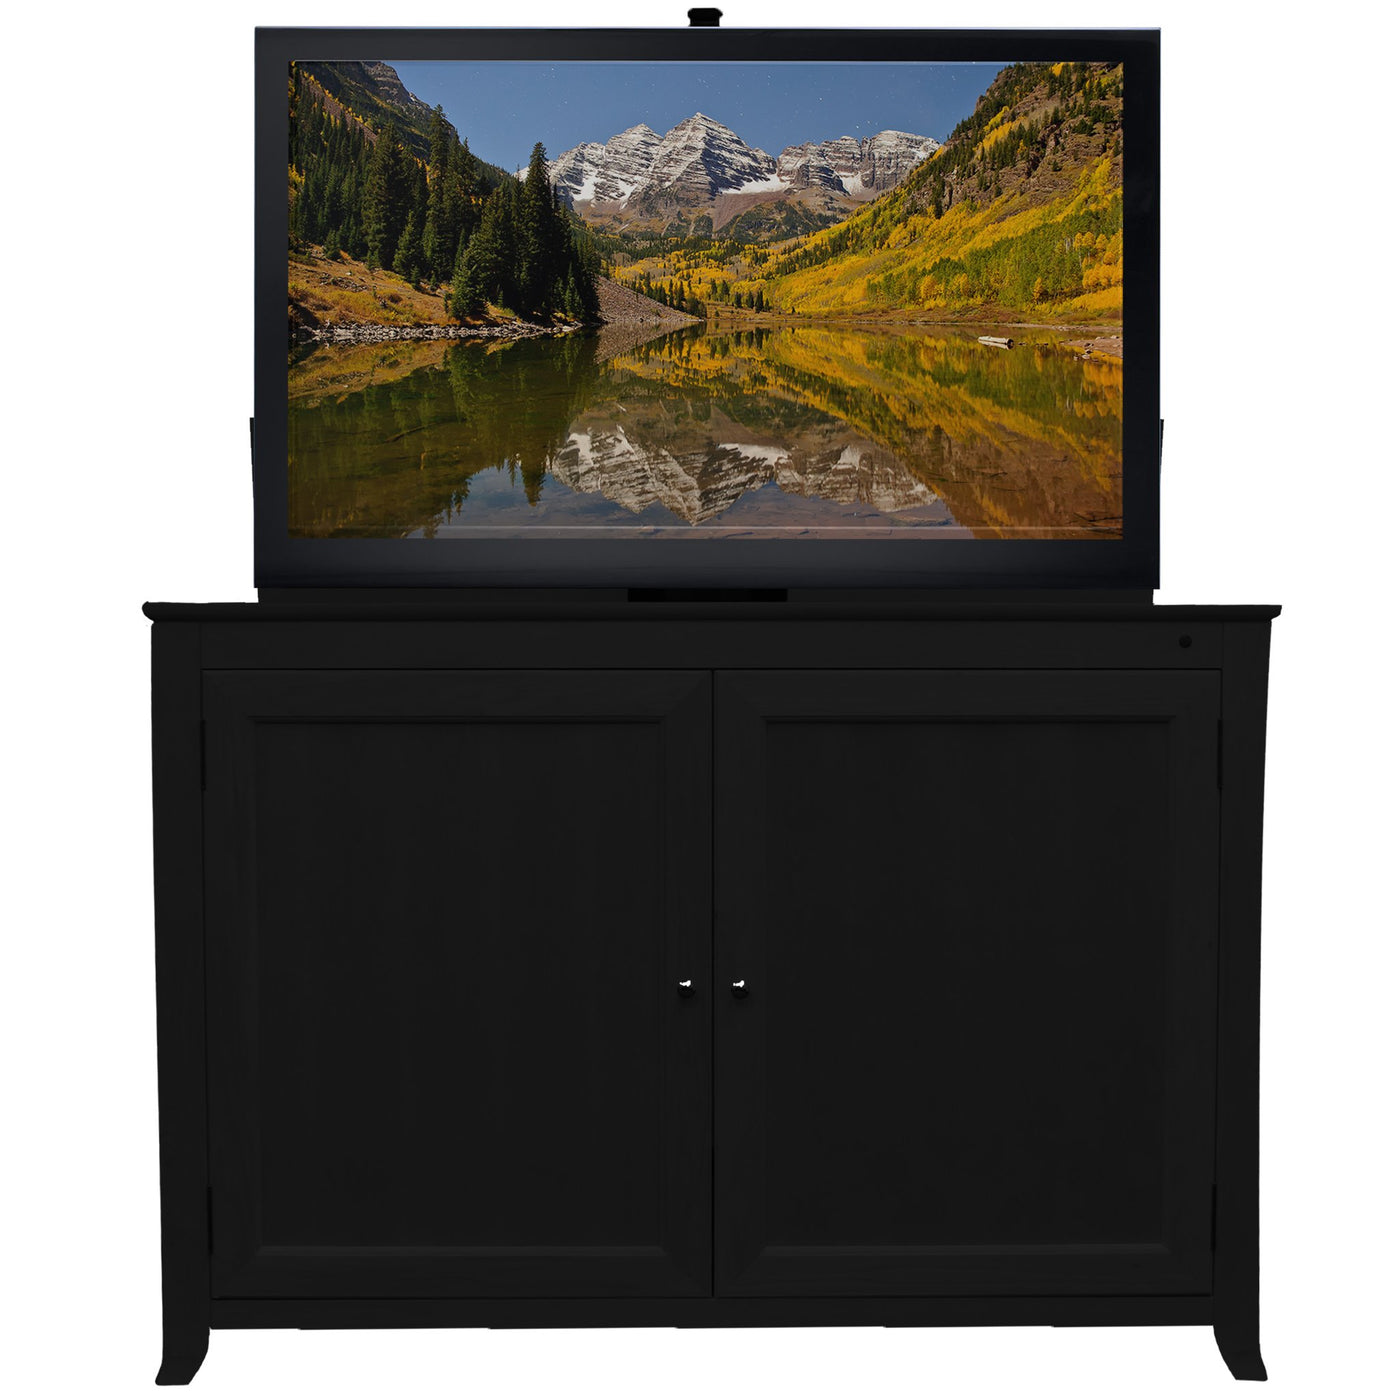 Touchstone 70156 Monterey Tv Lift Cabinet For Tvs Up To 60